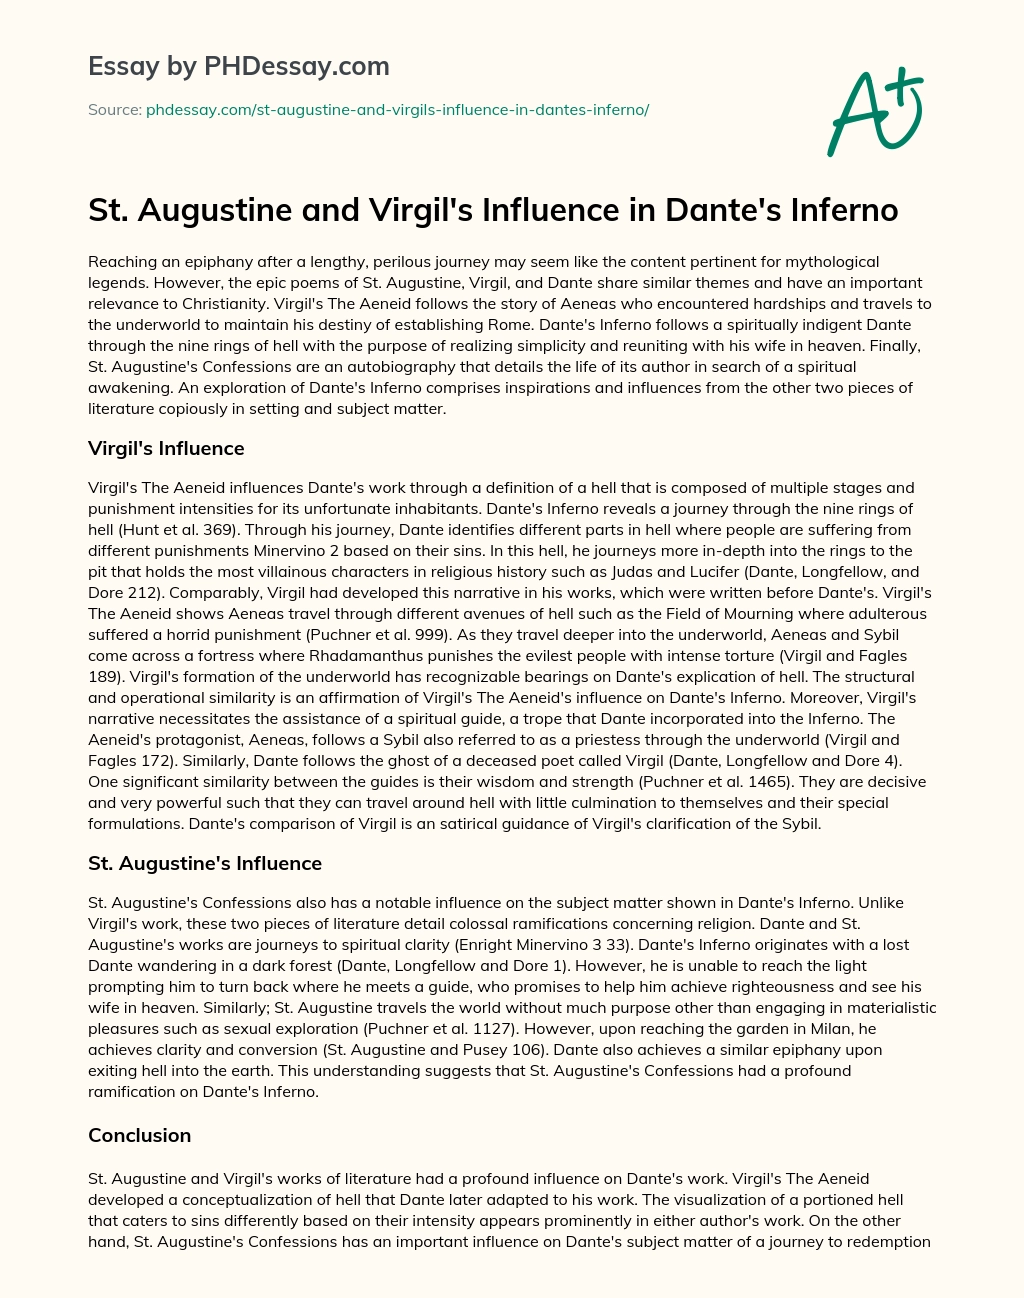 St. Augustine and Virgil’s Influence in Dante’s Inferno essay